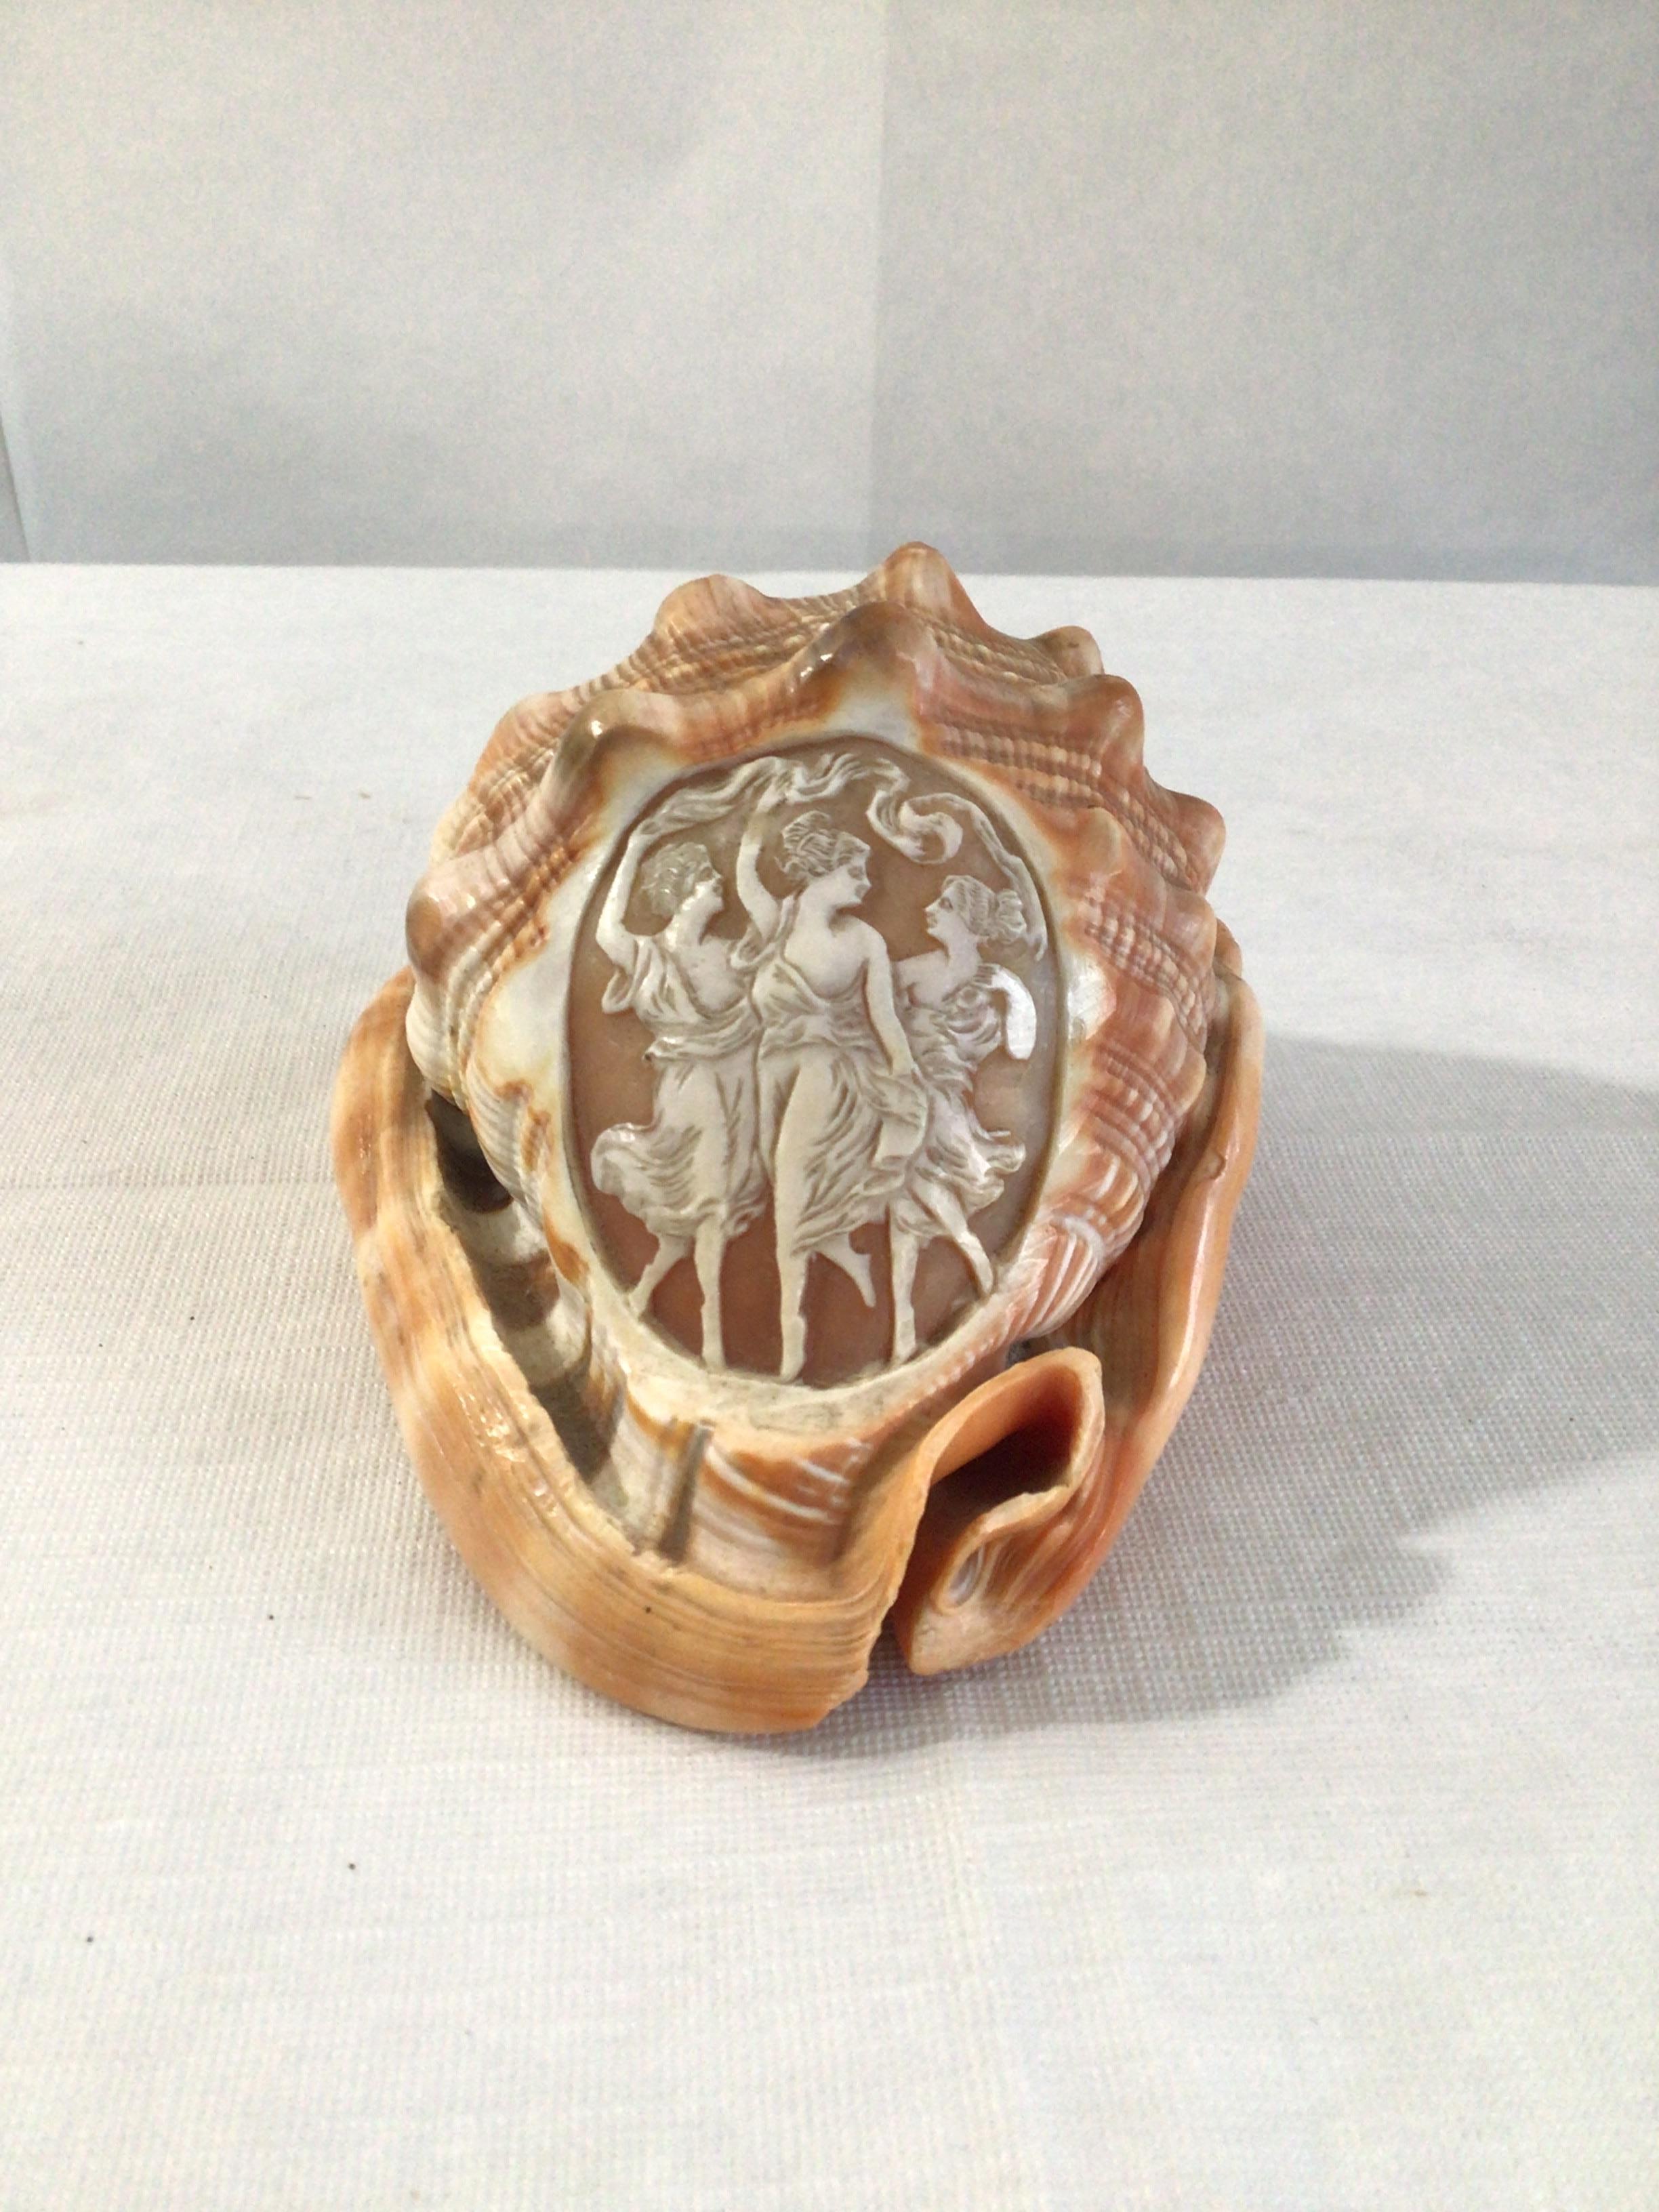 A beautiful hand carved cameo on conch seashell depicting dancing women made circa 1950s

.